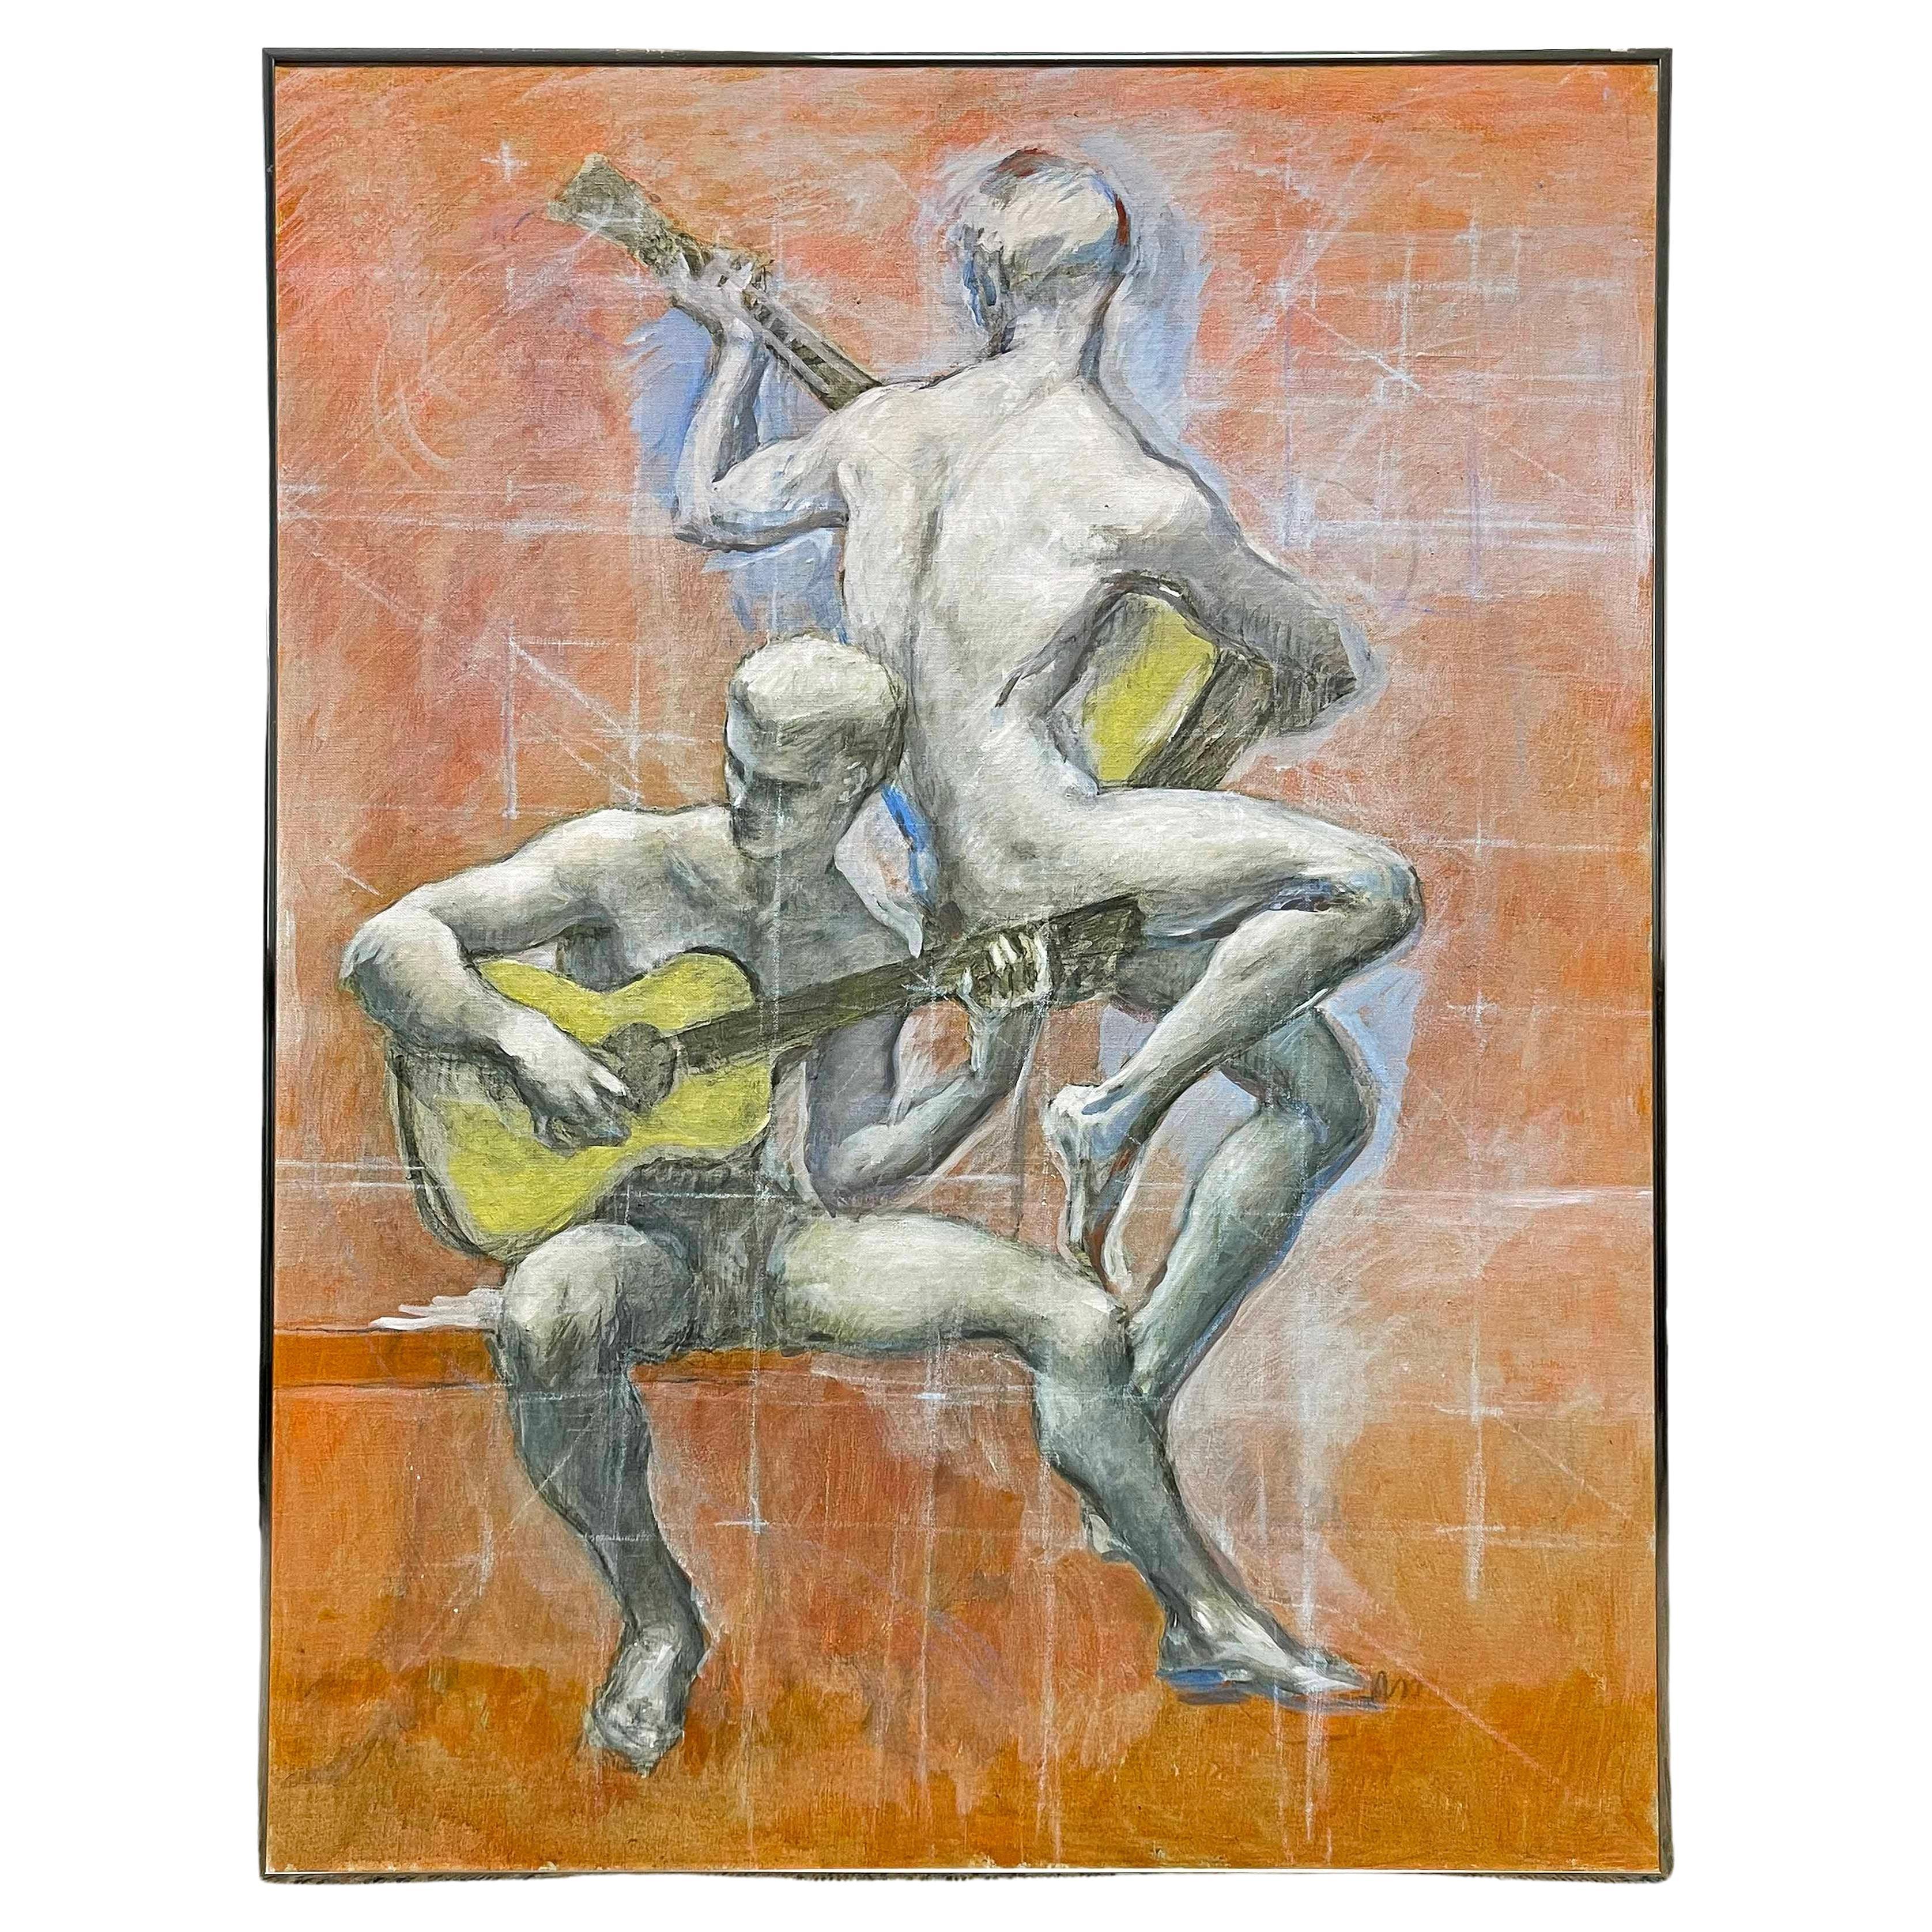 "Nudes with Guitars", Mid Century Painting w/ Male Nudes by Christopher Clark For Sale